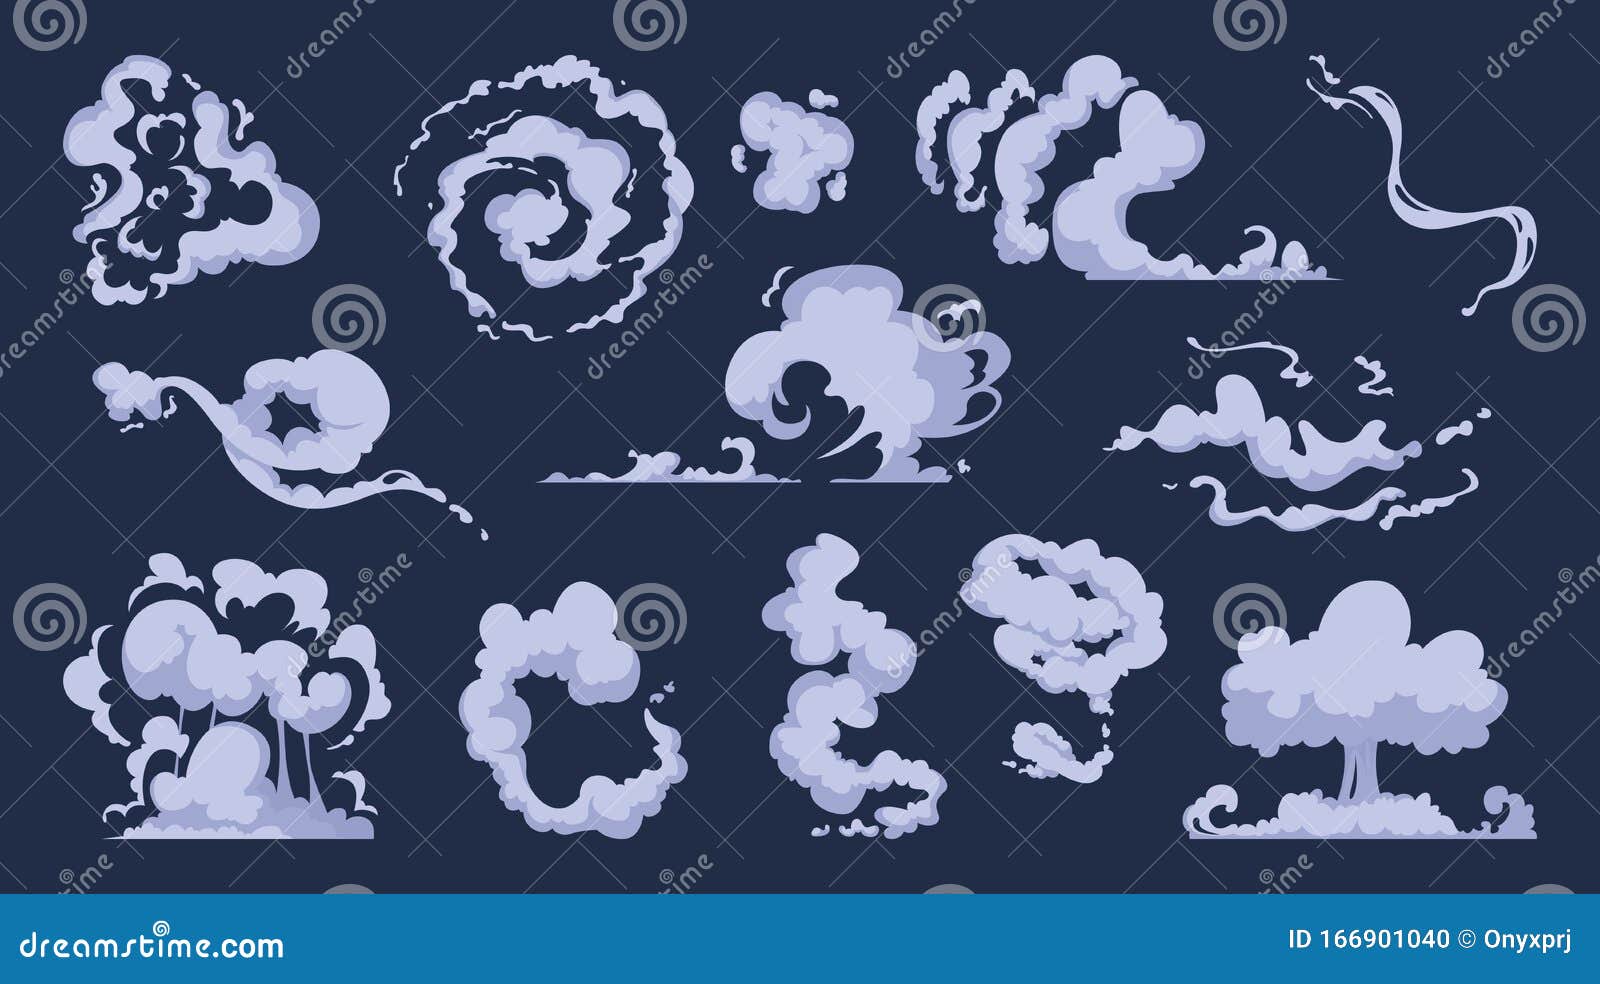 Cartoon Smoke. Vfx Comic Bang Clouds Explosion of Bomb Speed Storm Motion  Wind Vector Art Collection Stock Vector - Illustration of boom, smoky:  166901040